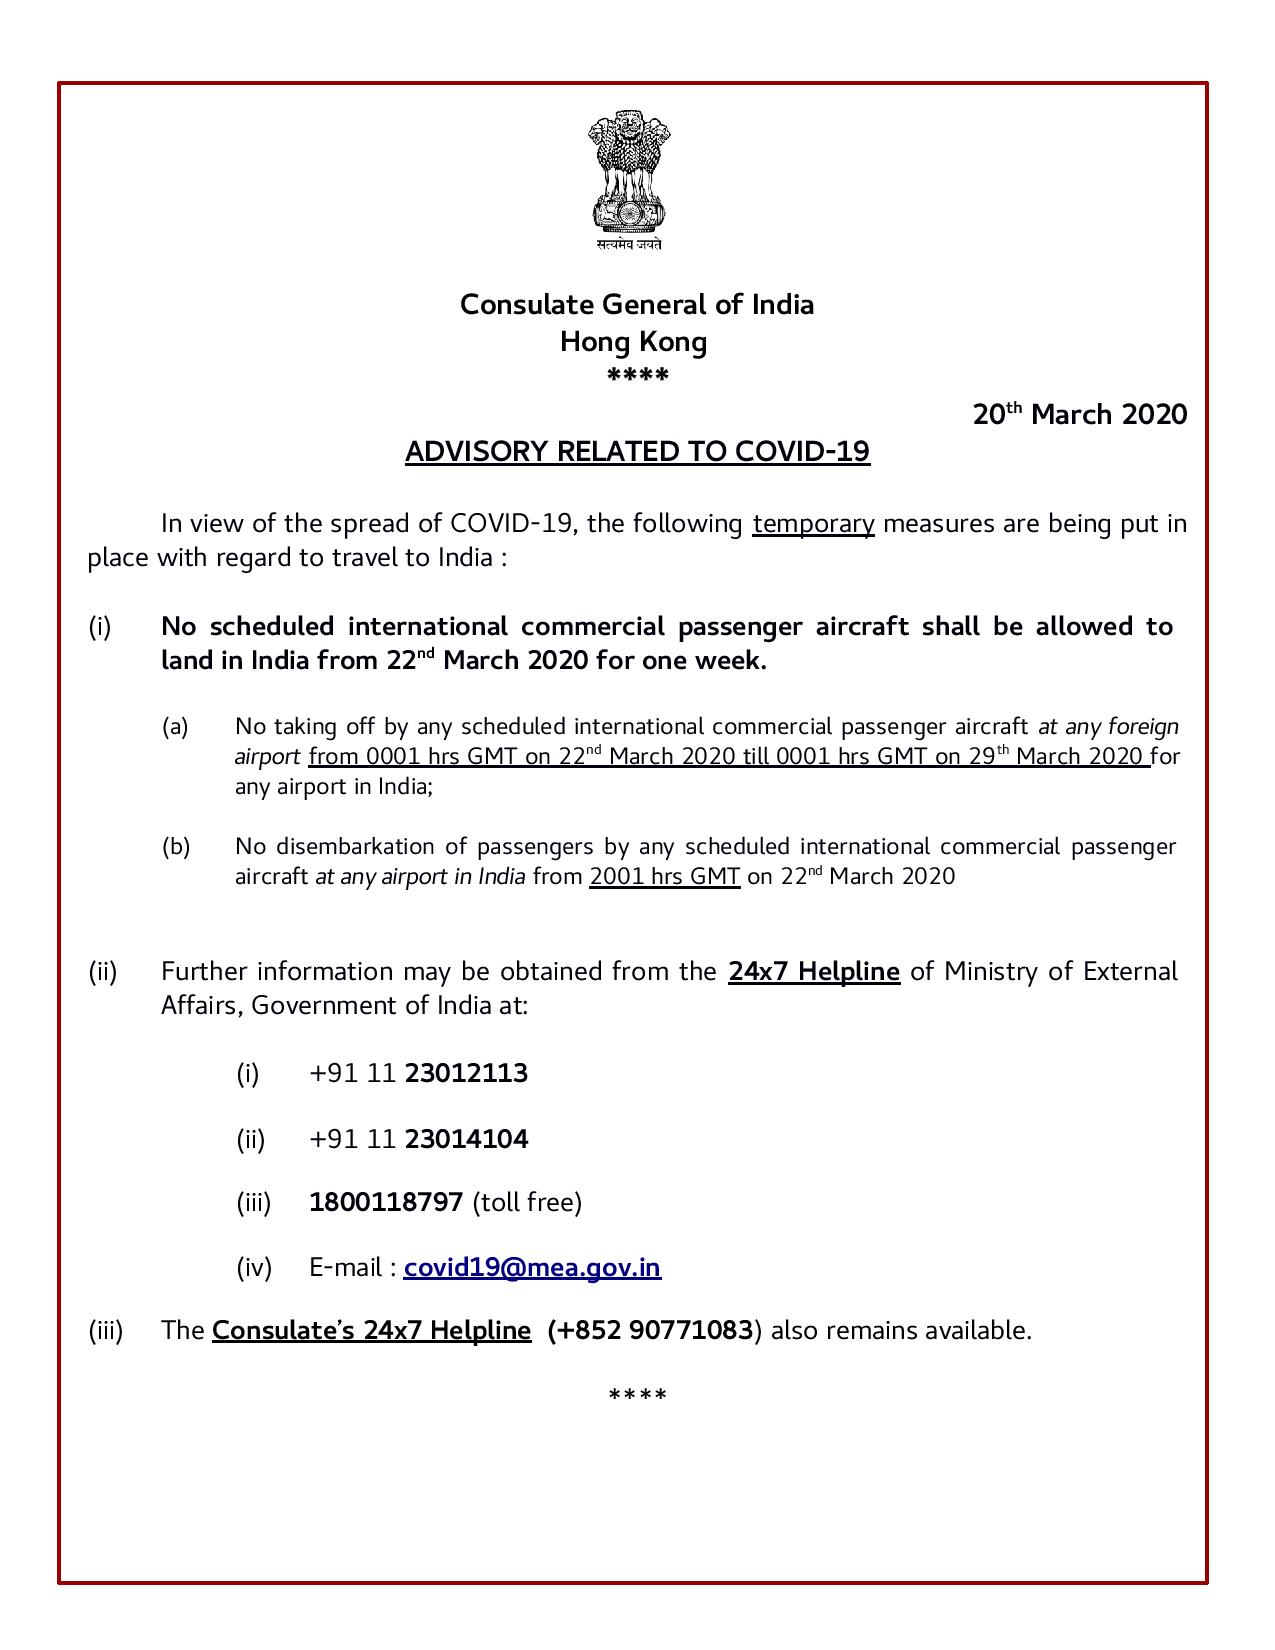 Advisory: No scheduled international commercial passenger aircraft shall be allowed to land in India from 22nd March 2020 for one week.